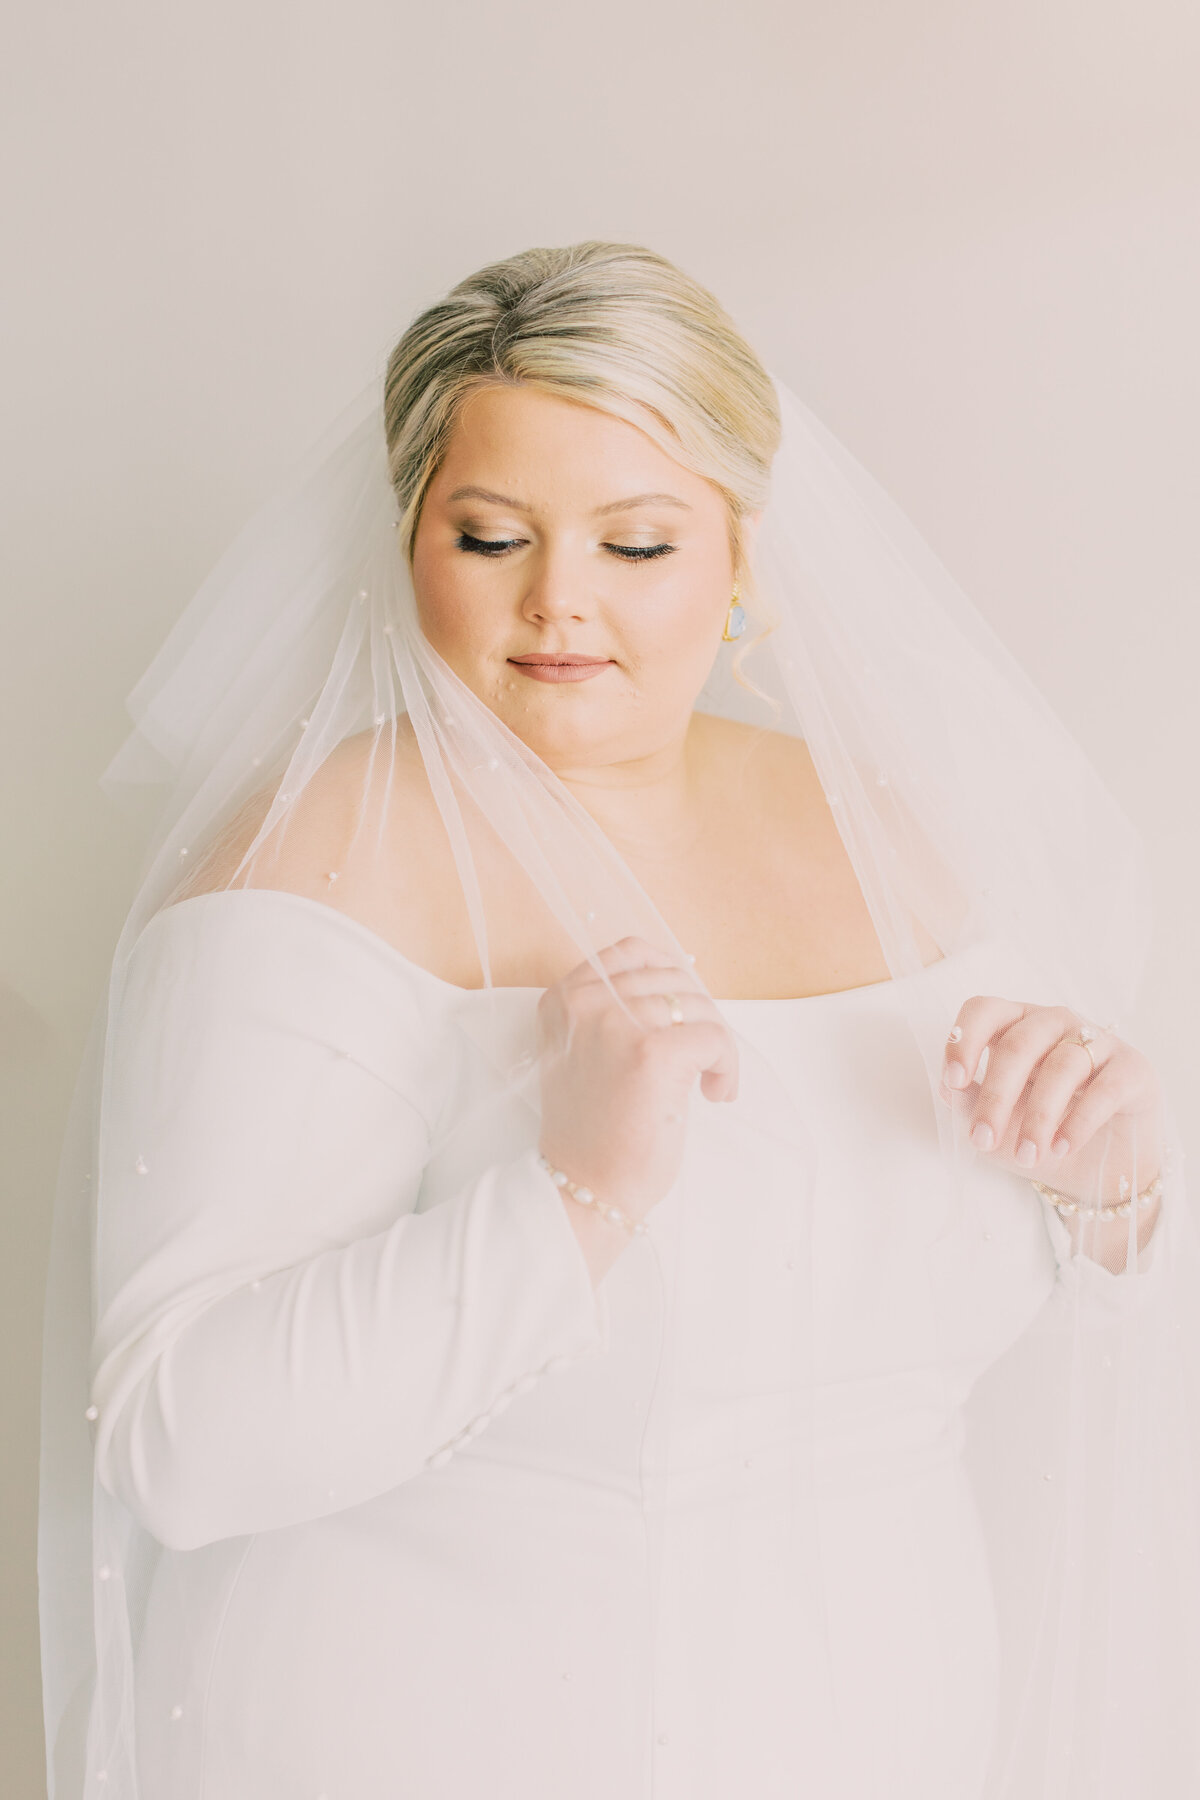 Bride with blonde hair holding veil in front of dress